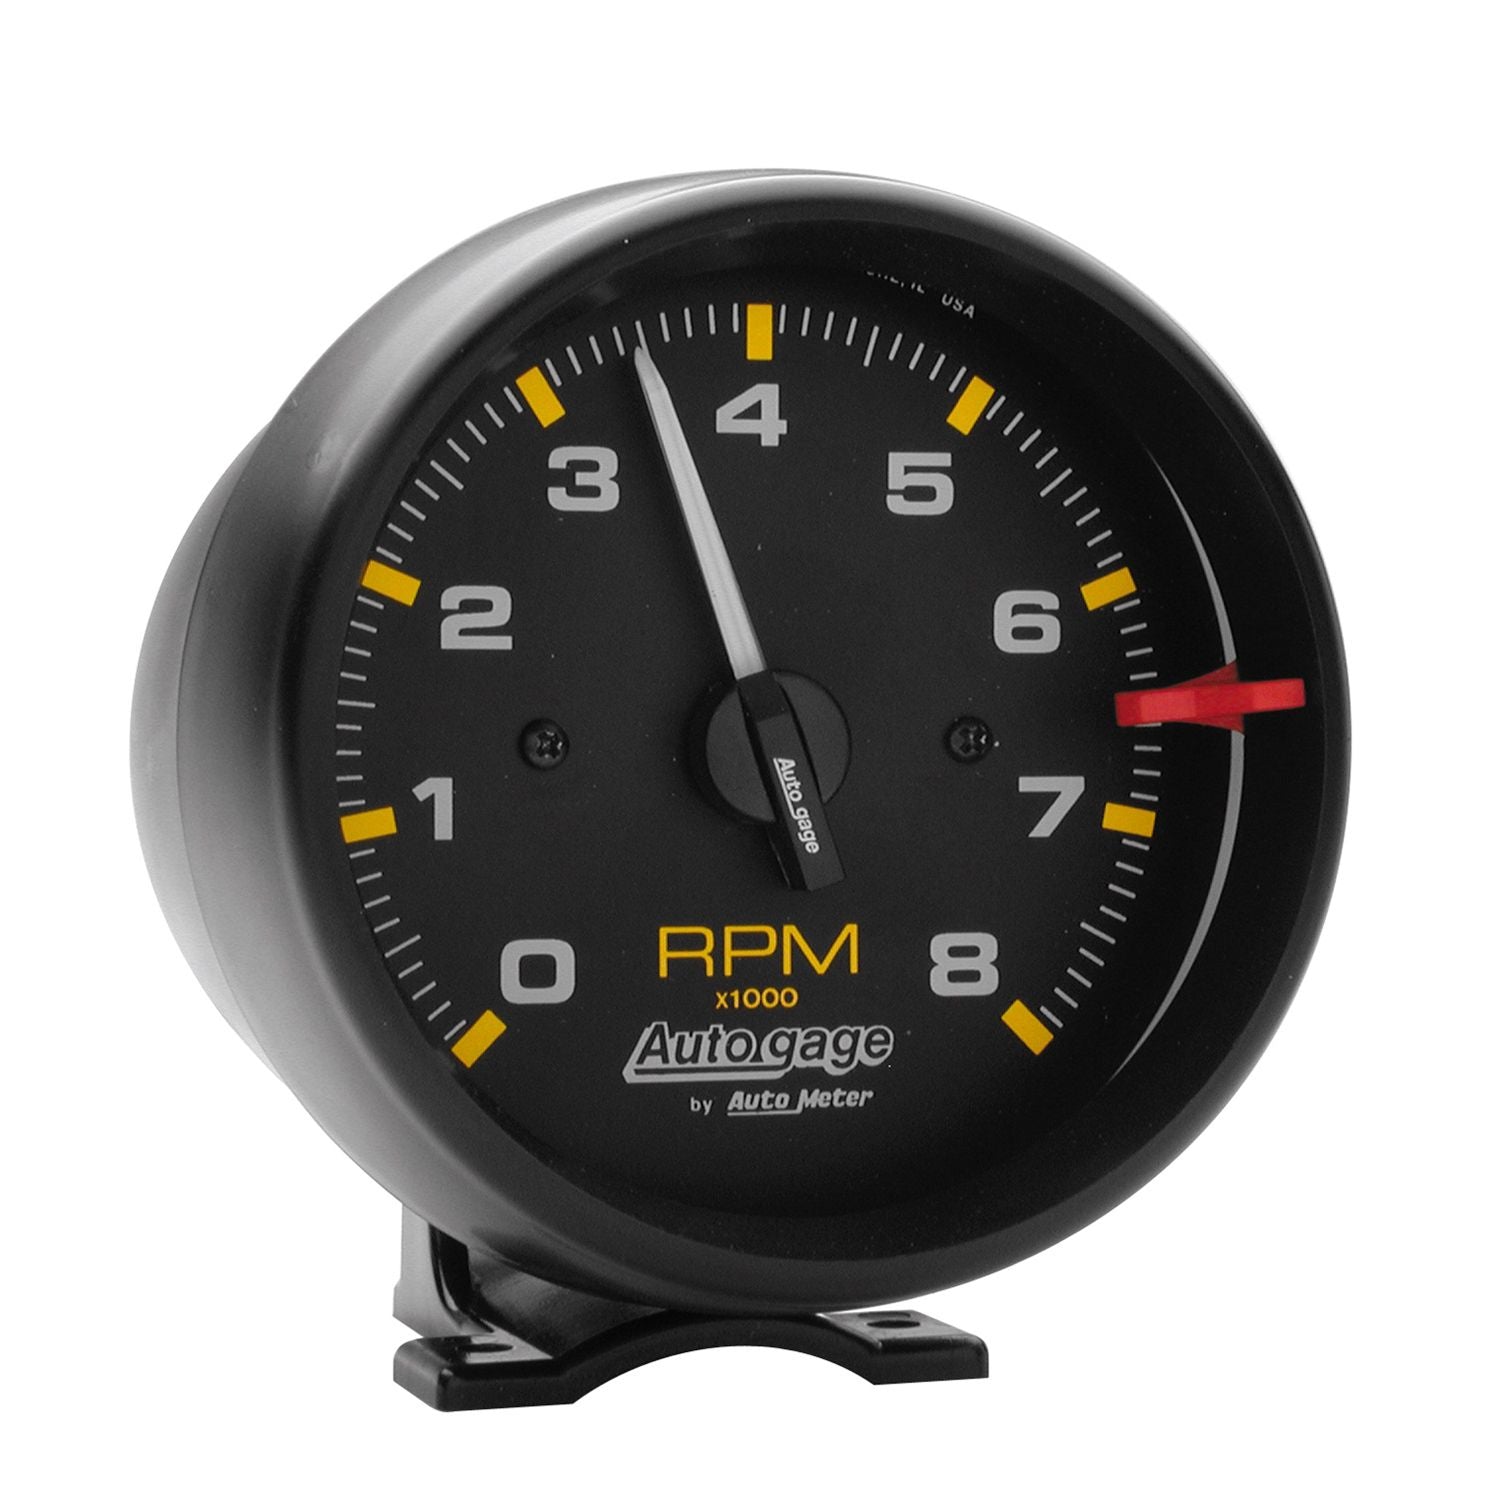 AutoMeter Auto Gage Black 8,000 RPM 3-3/4" Pedestal Mount Tachometer - Dirty Racing Products